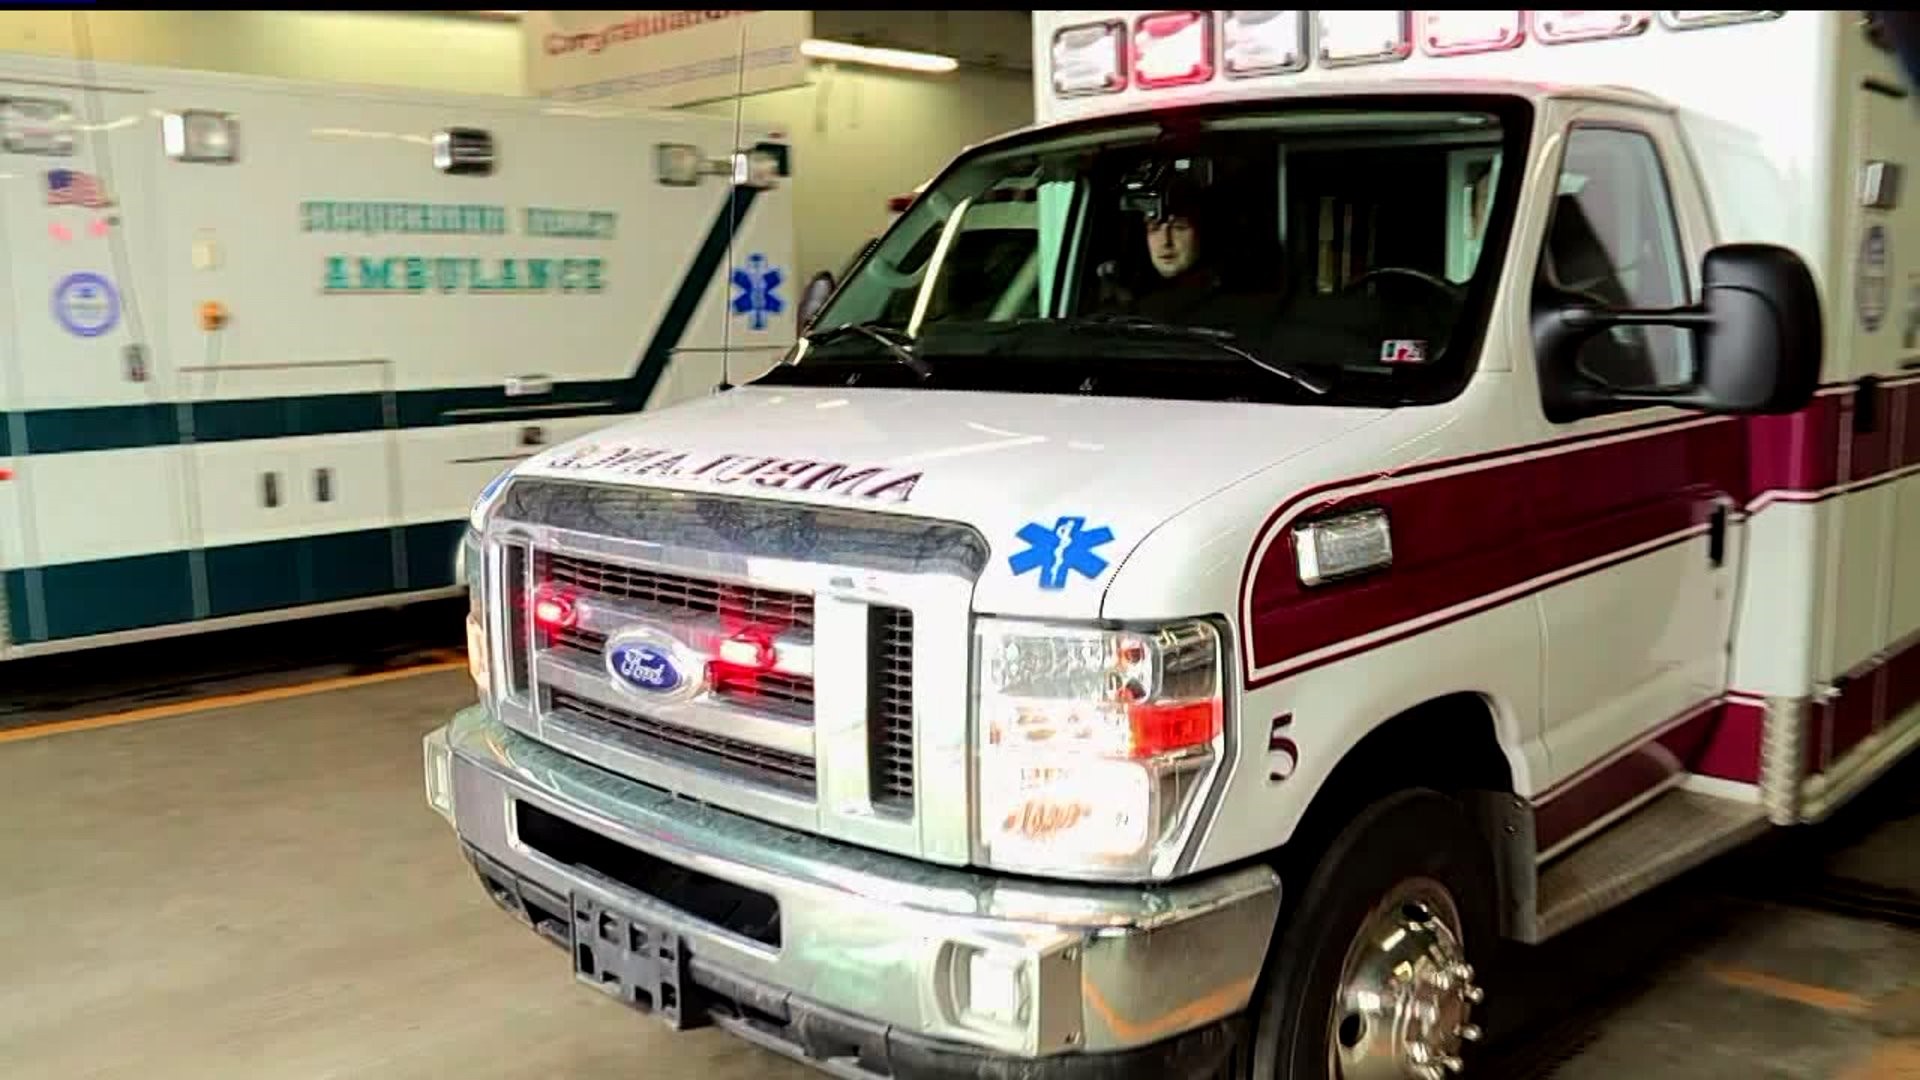 Responding in slick conditions for EMS services